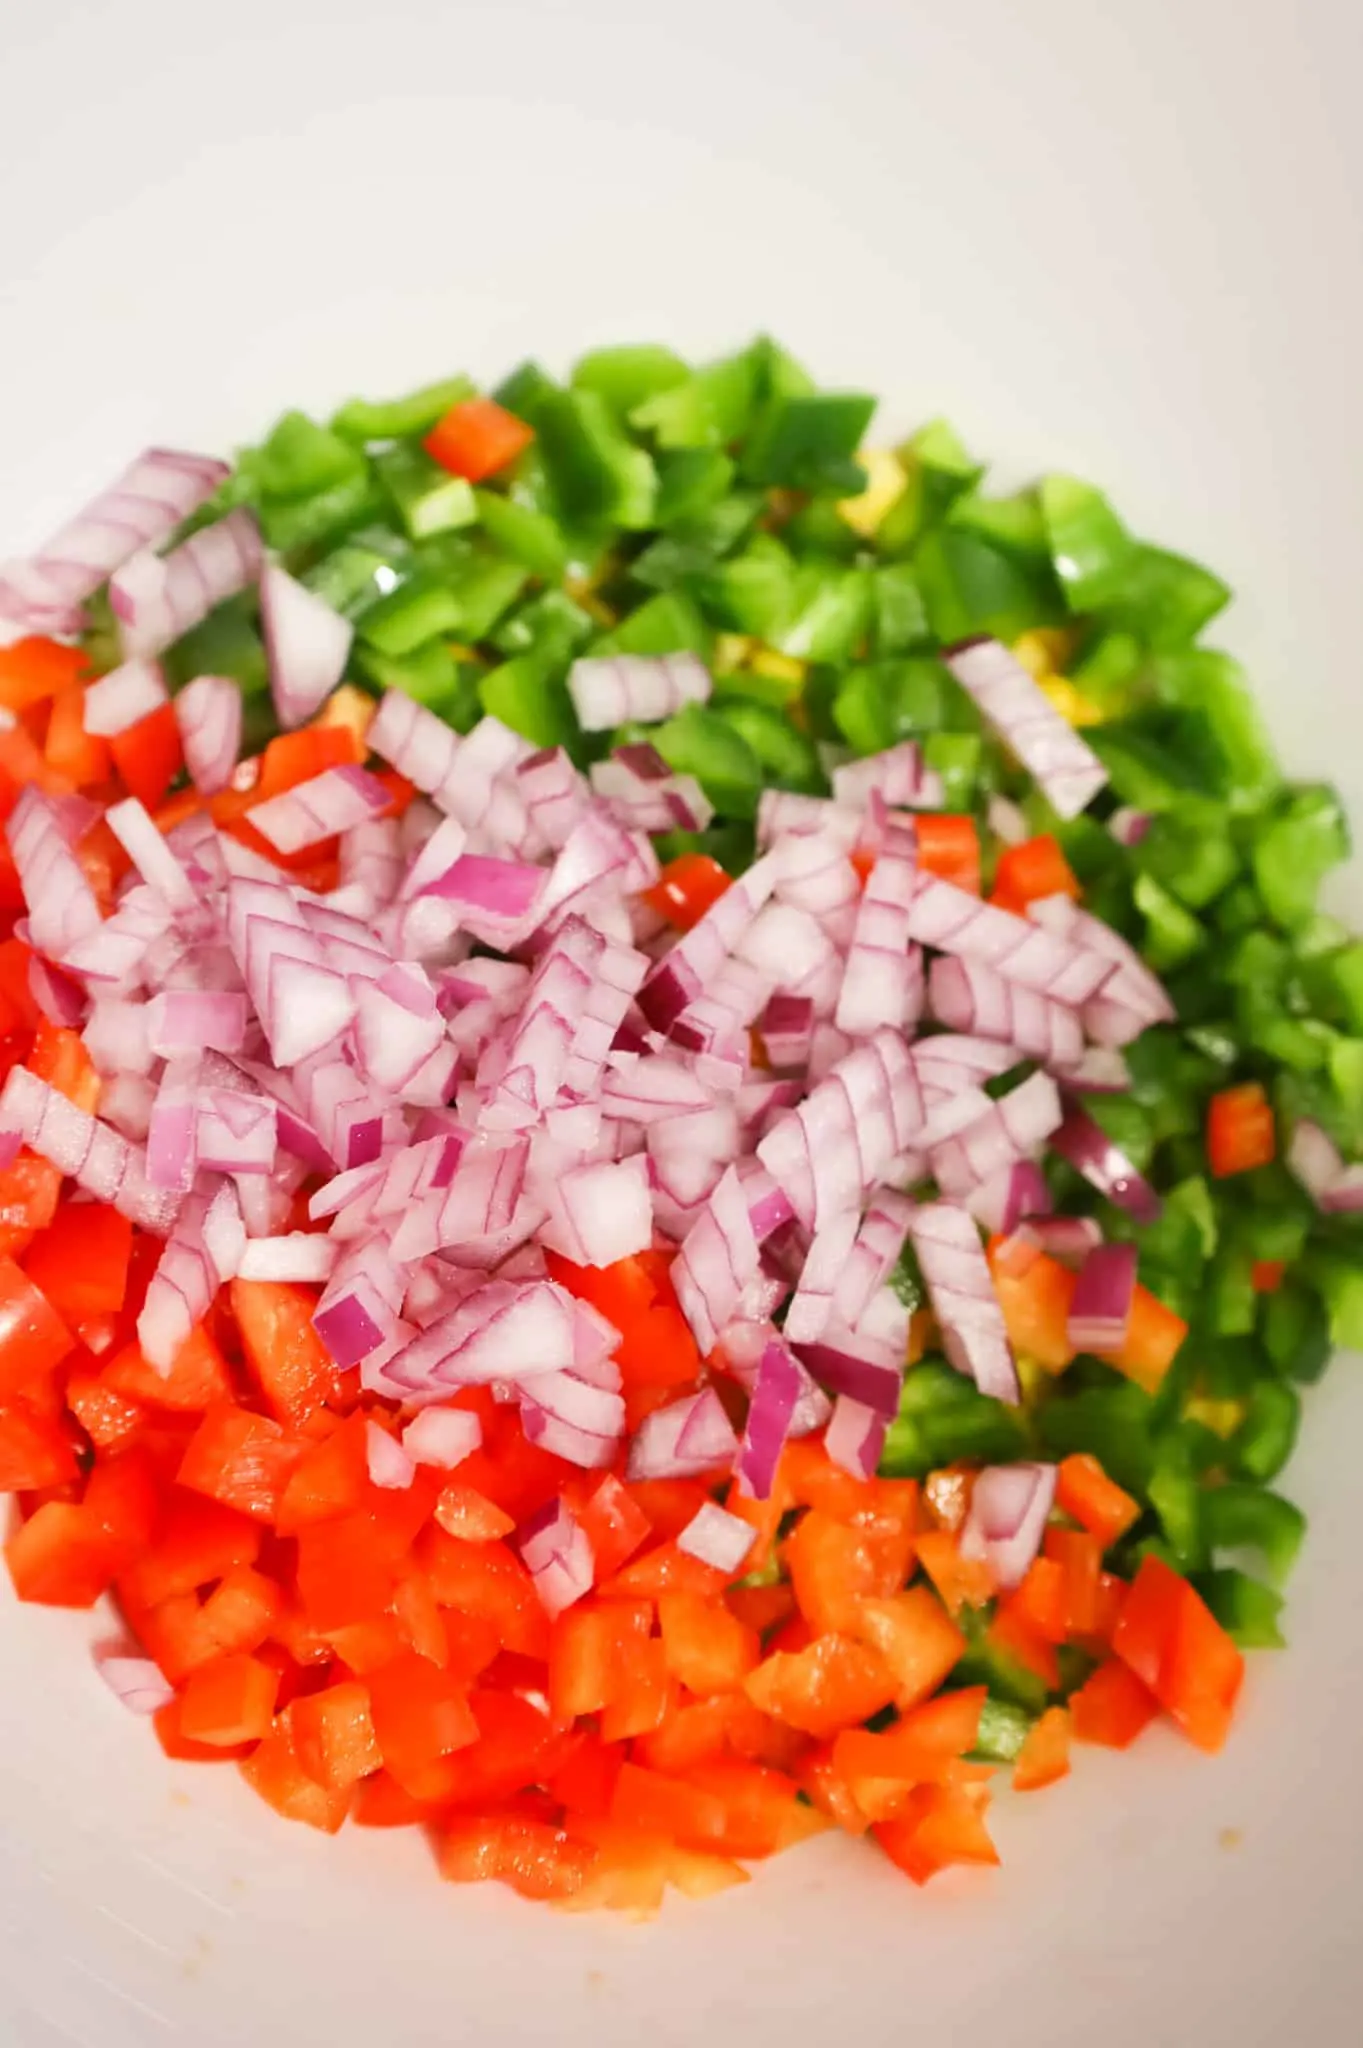 diced red onions, red bell peppers and green bell peppers in a mixing bowl